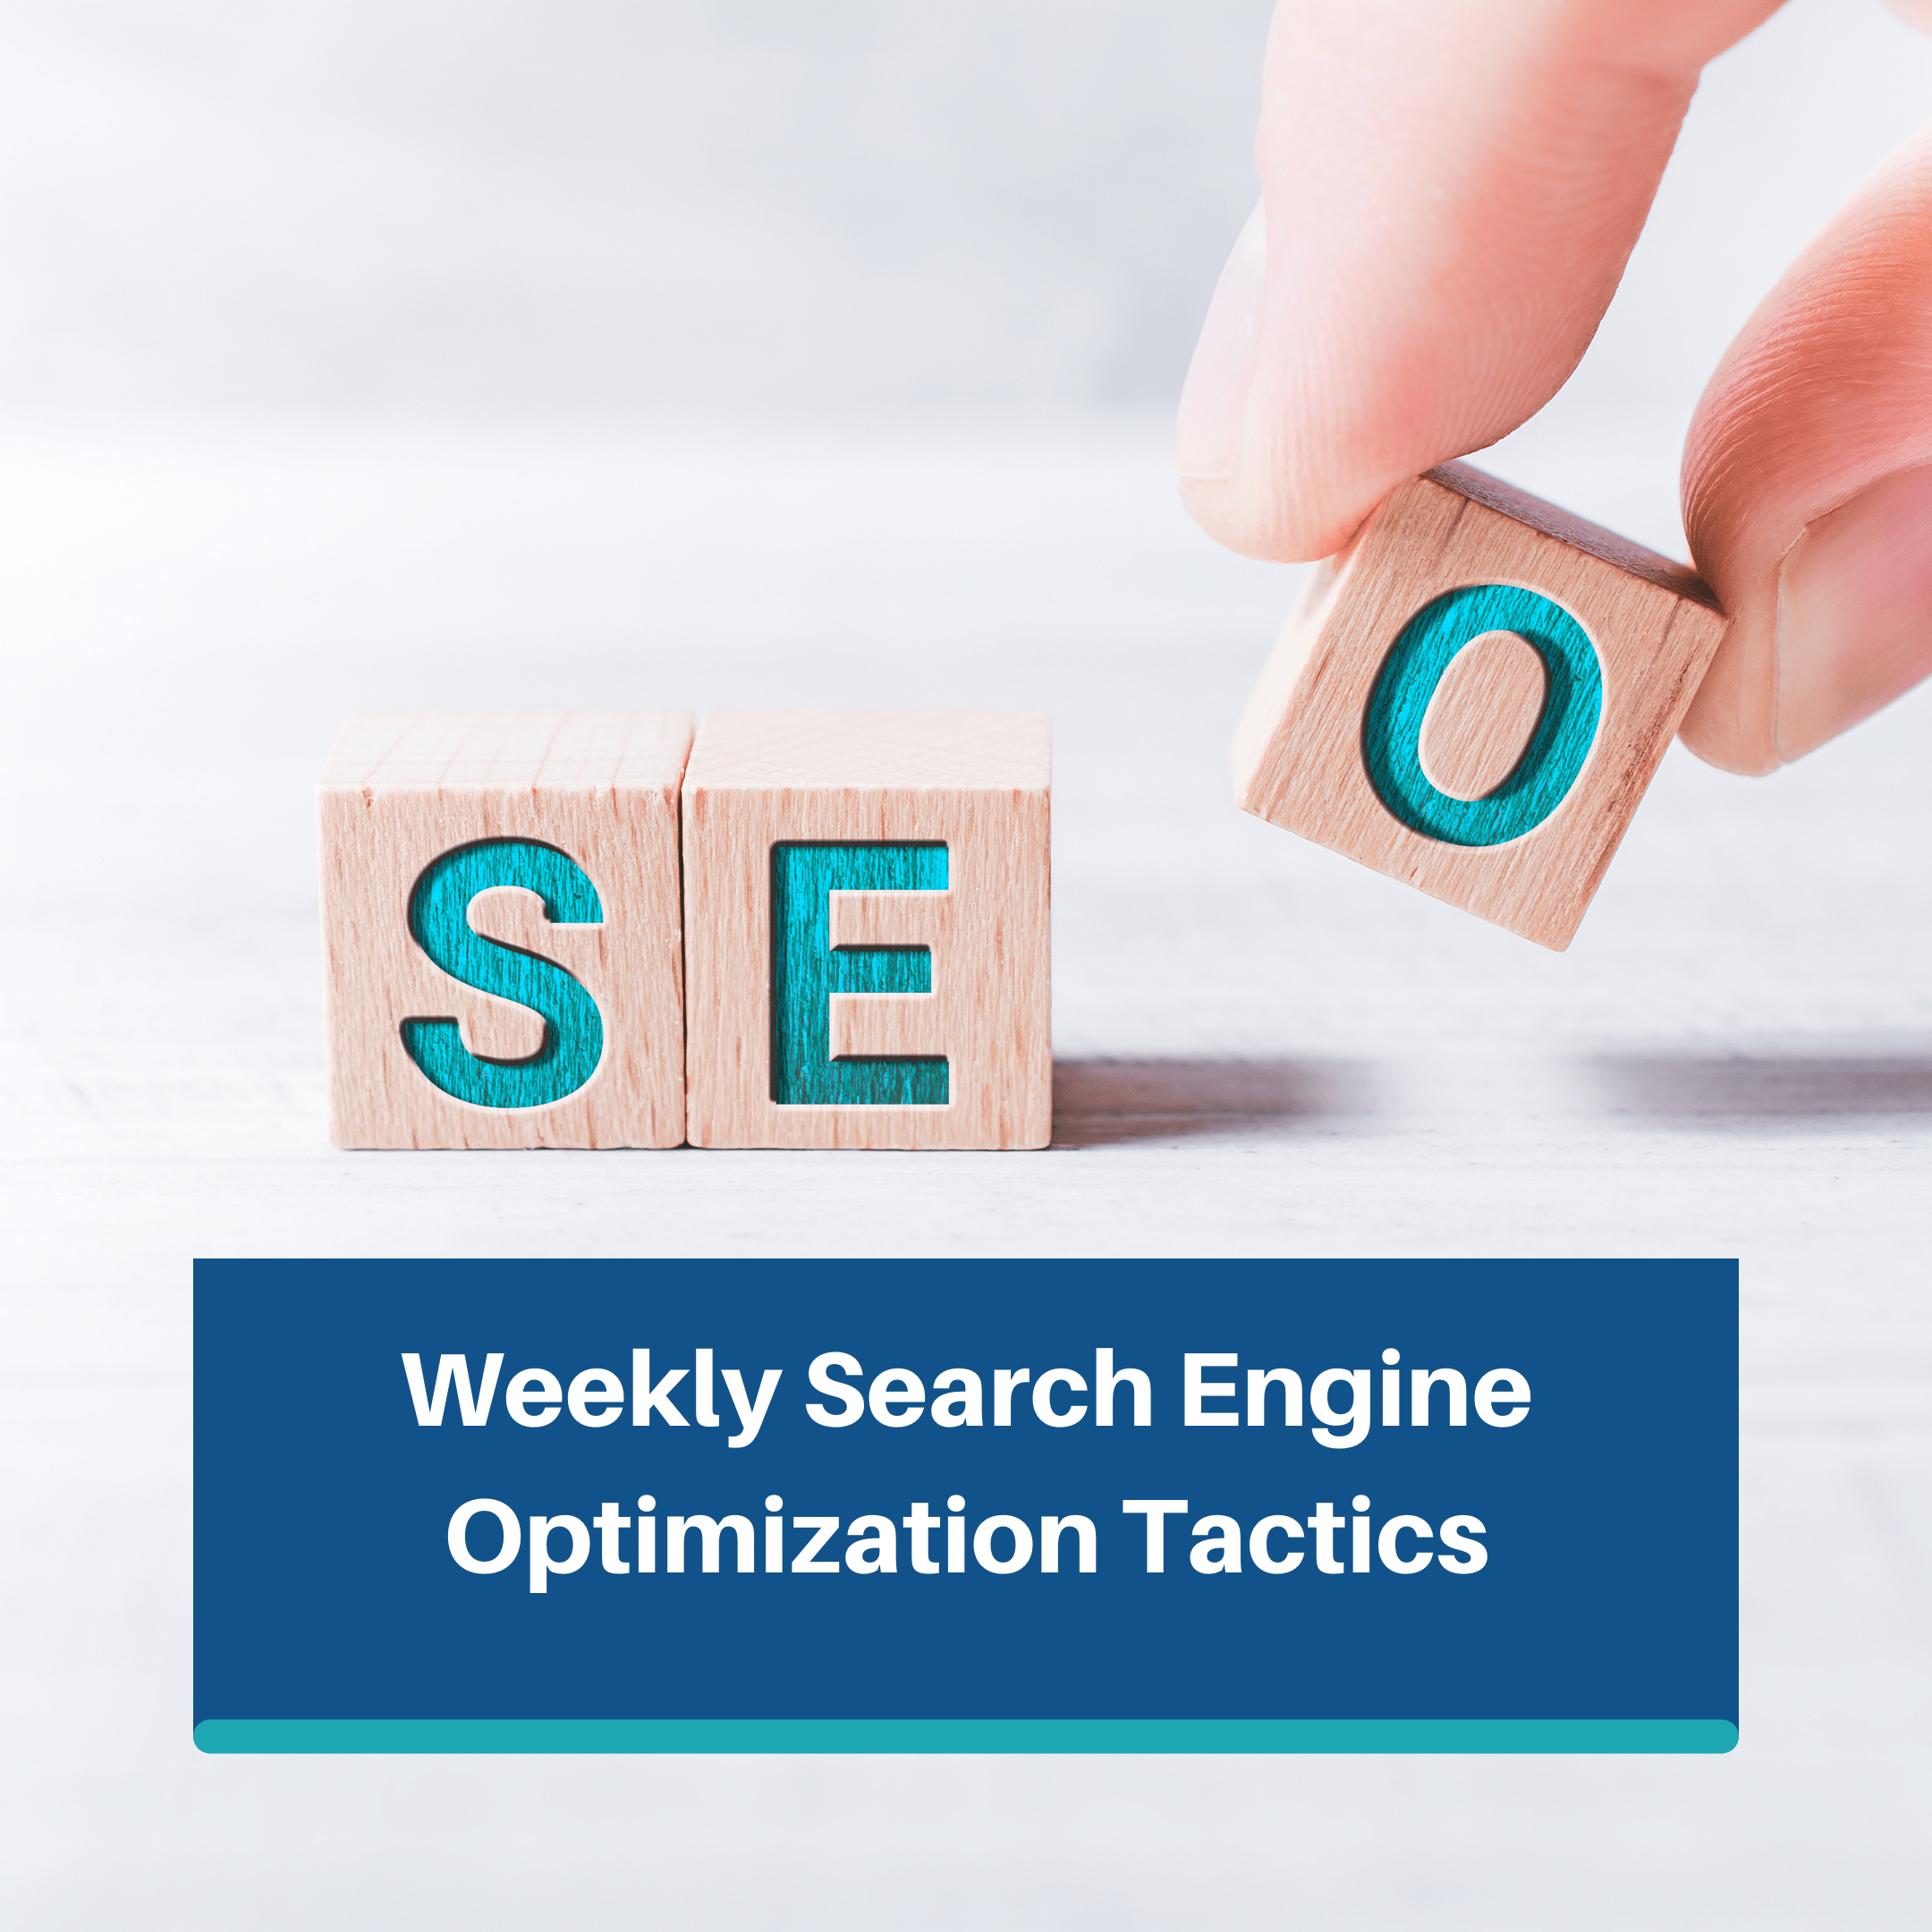 Weekly Search Engine Optimization Tactics